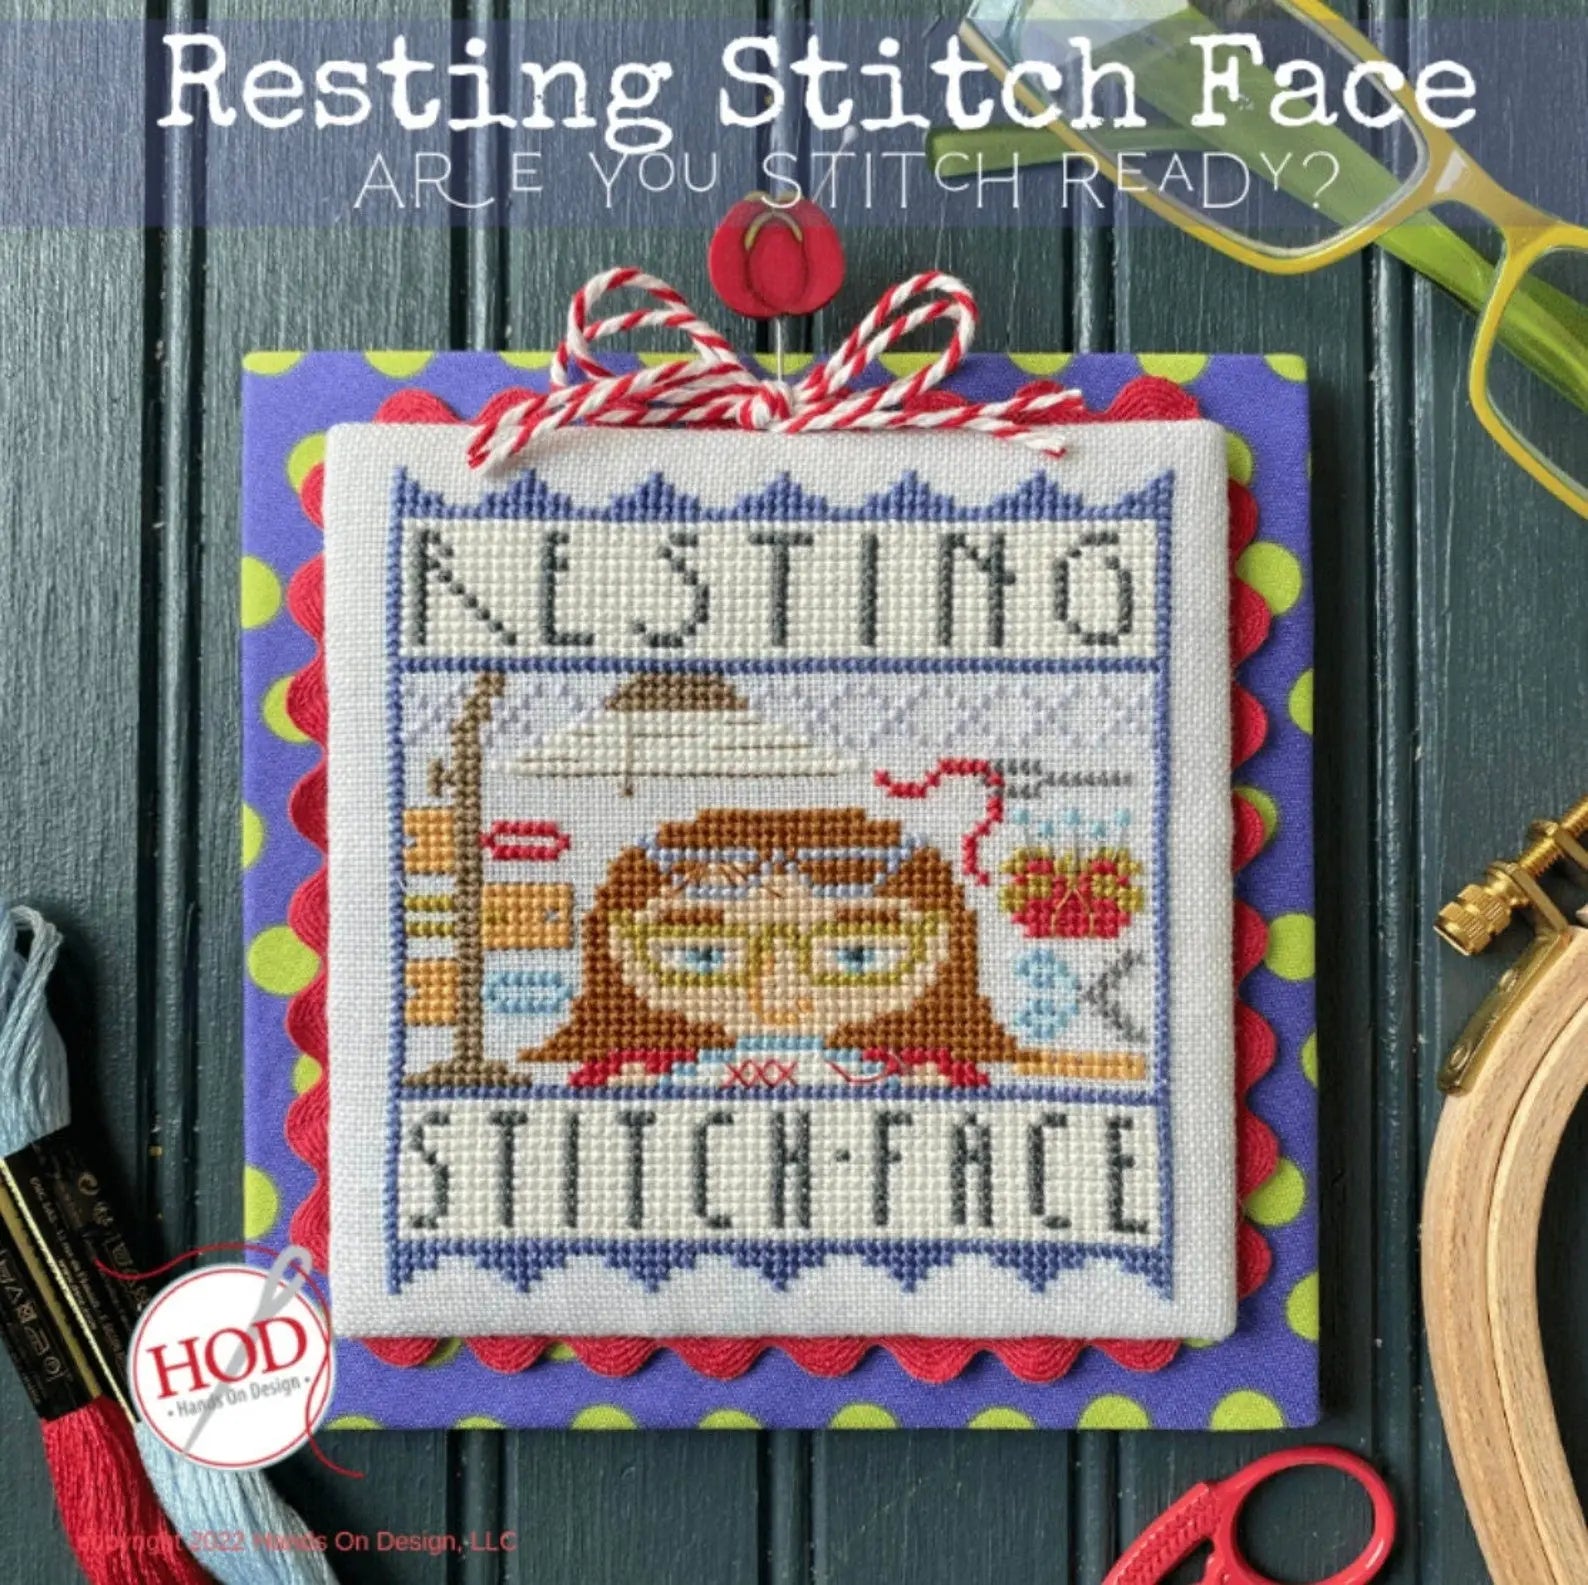 Resting Stitch Face with Pin by Hands on Designs Hands On Design